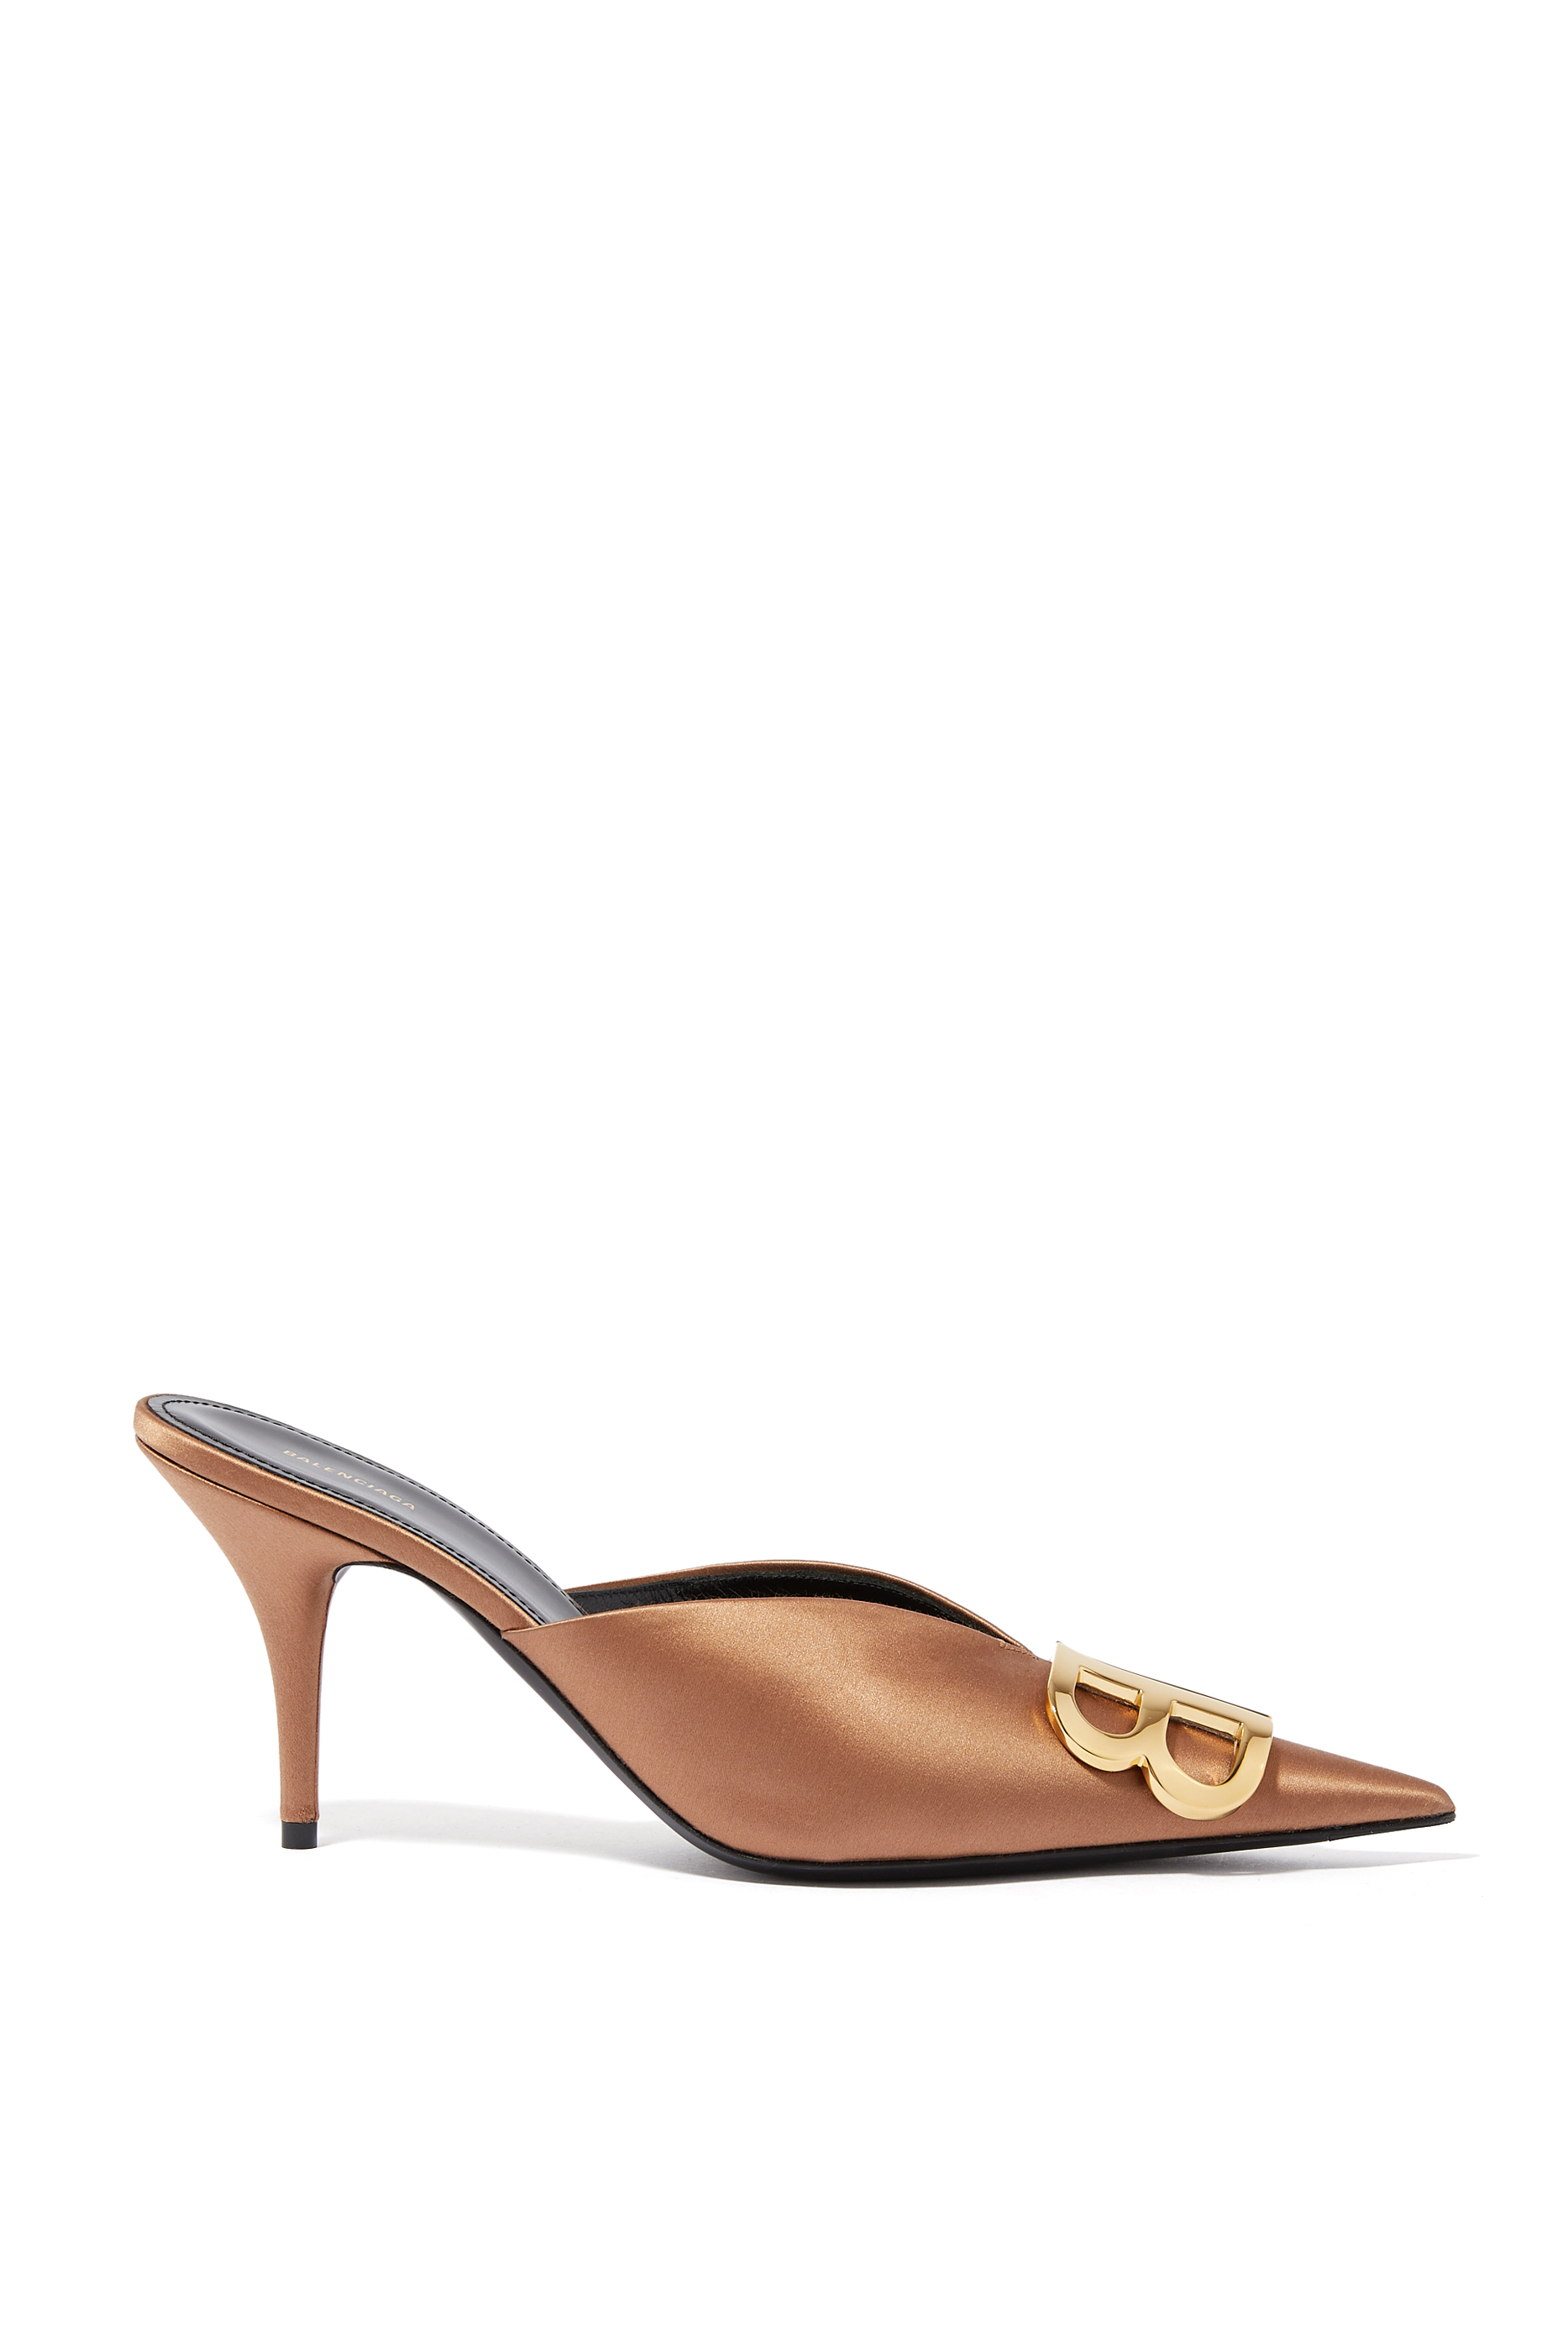 Buy Balenciaga BB Satin Mules - Womens for AED 3250.00 Heels for Women